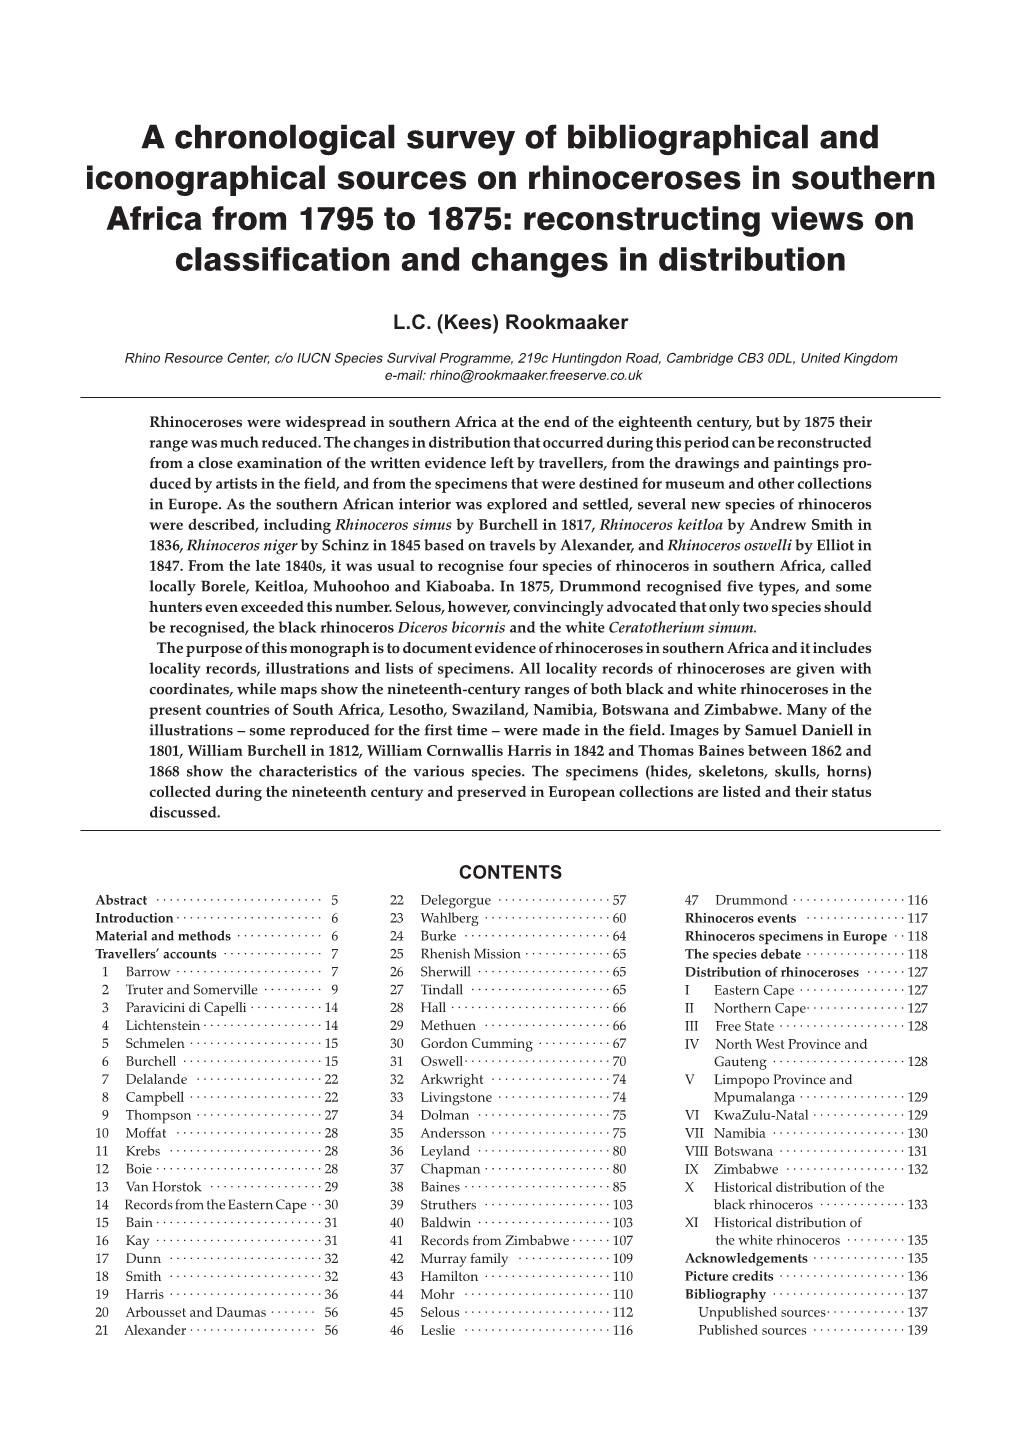 Reconstructing Views on Classification and Changes in Distribution